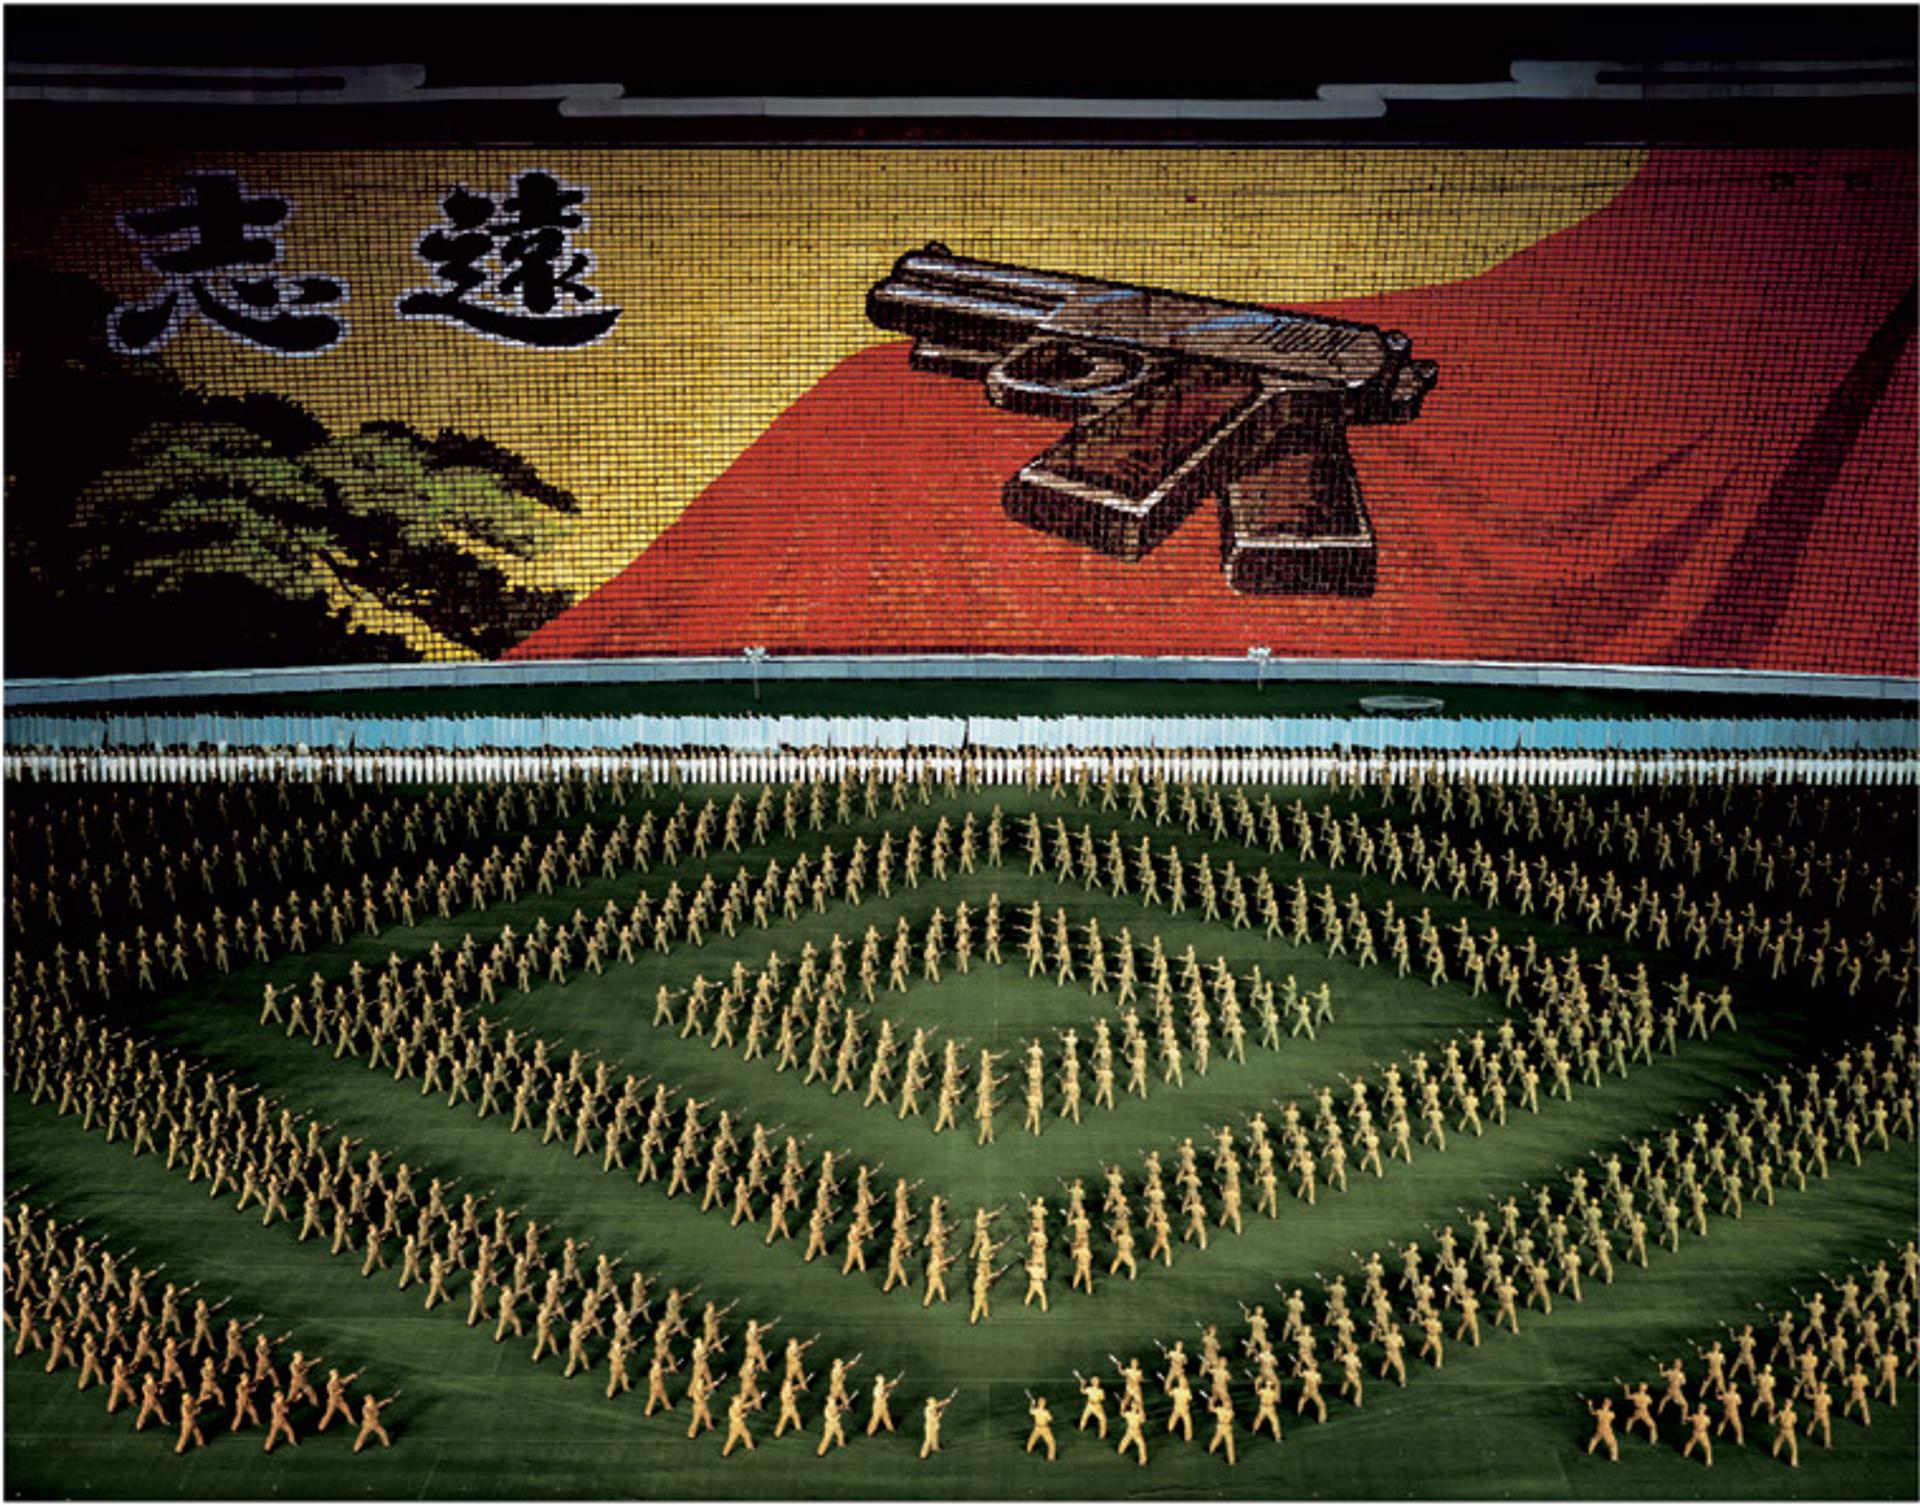 One-Half Revolution and Everything Turns Red: ANDREAS GURSKY in North Korea